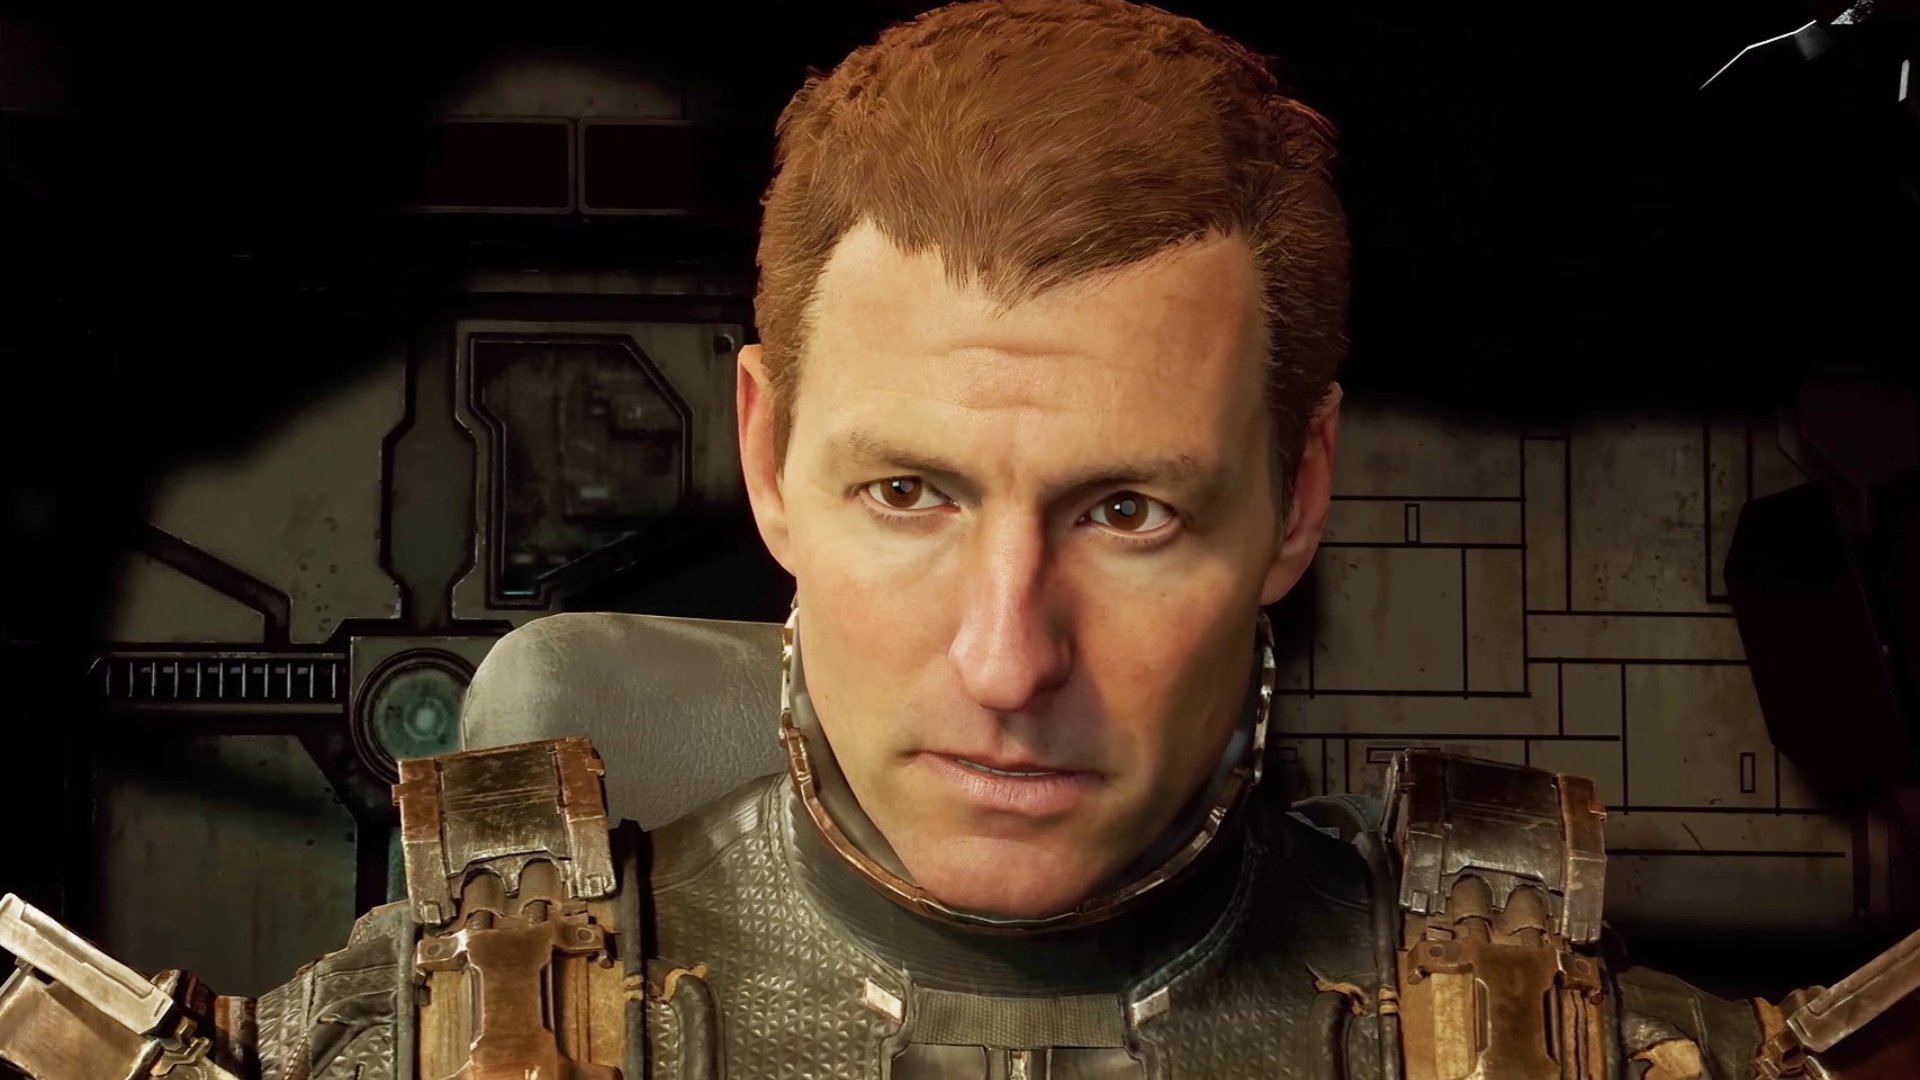 Dead Space Remake’s Isaac Clarke gets classic Dead Space 2 makeover